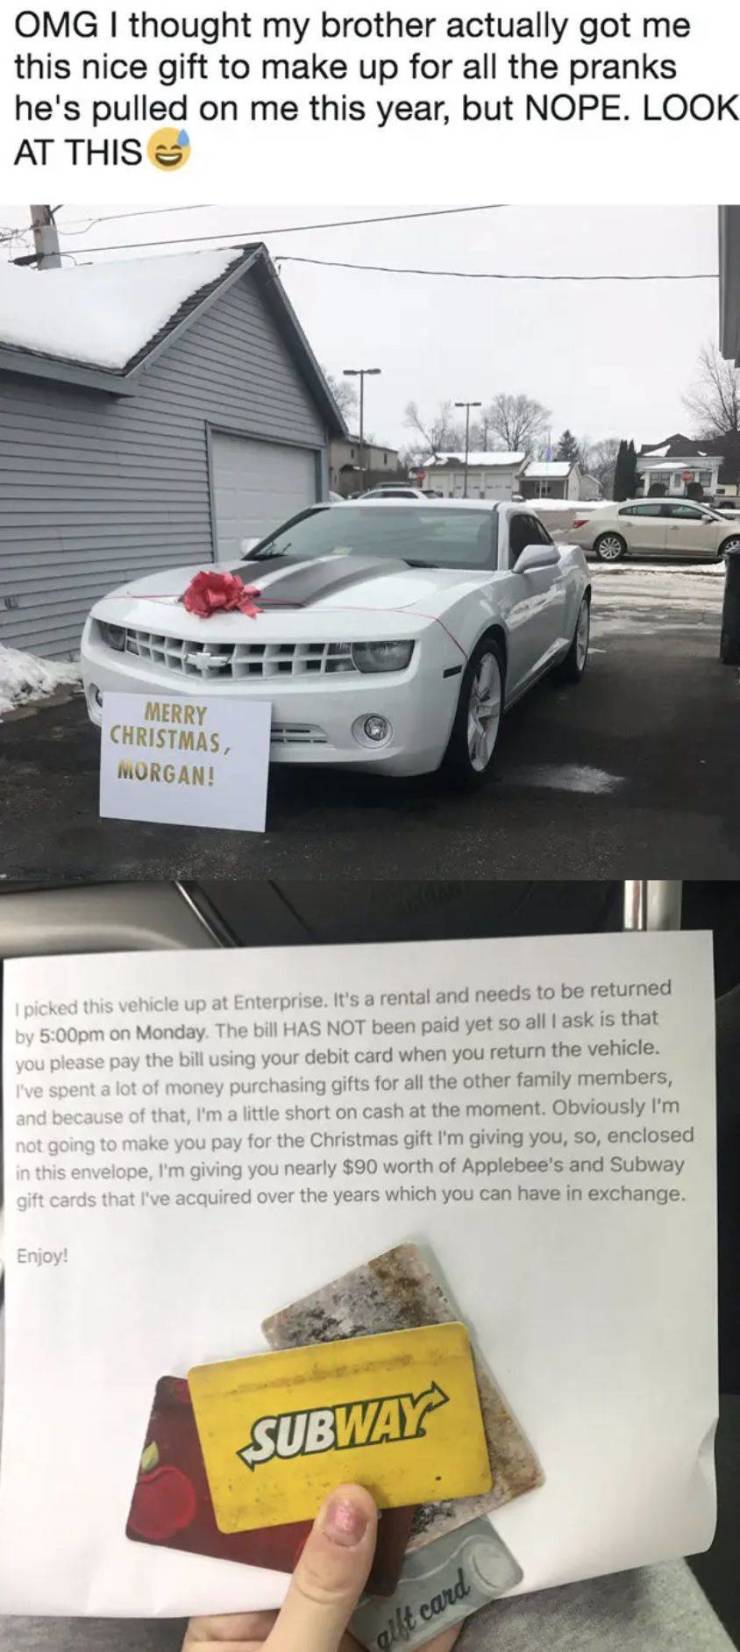 wholesome note pranks - Omg I thought my brother actually got me this nice gift to make up for all the pranks he's pulled on me this year, but Nope. Look At This Merry Christmas Morgan! I picked this vehicle up at Enterprise. It's a rental and needs to be